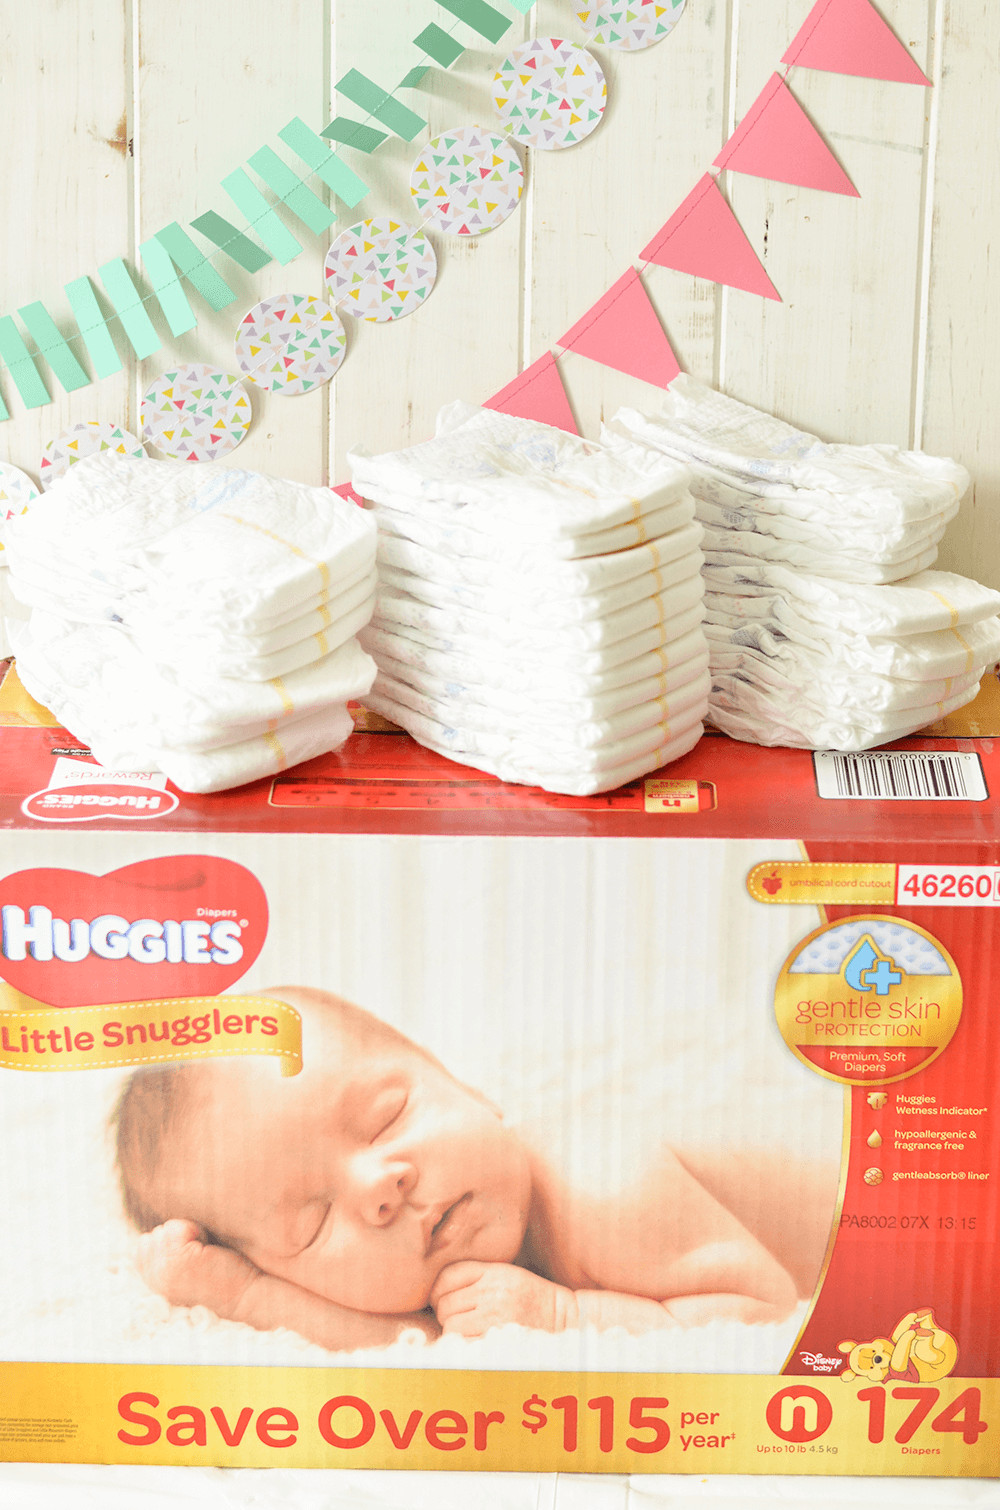 Baby Shower Diaper Party
 How to Throw a Diaper Drive A Charitable Baby Shower Idea